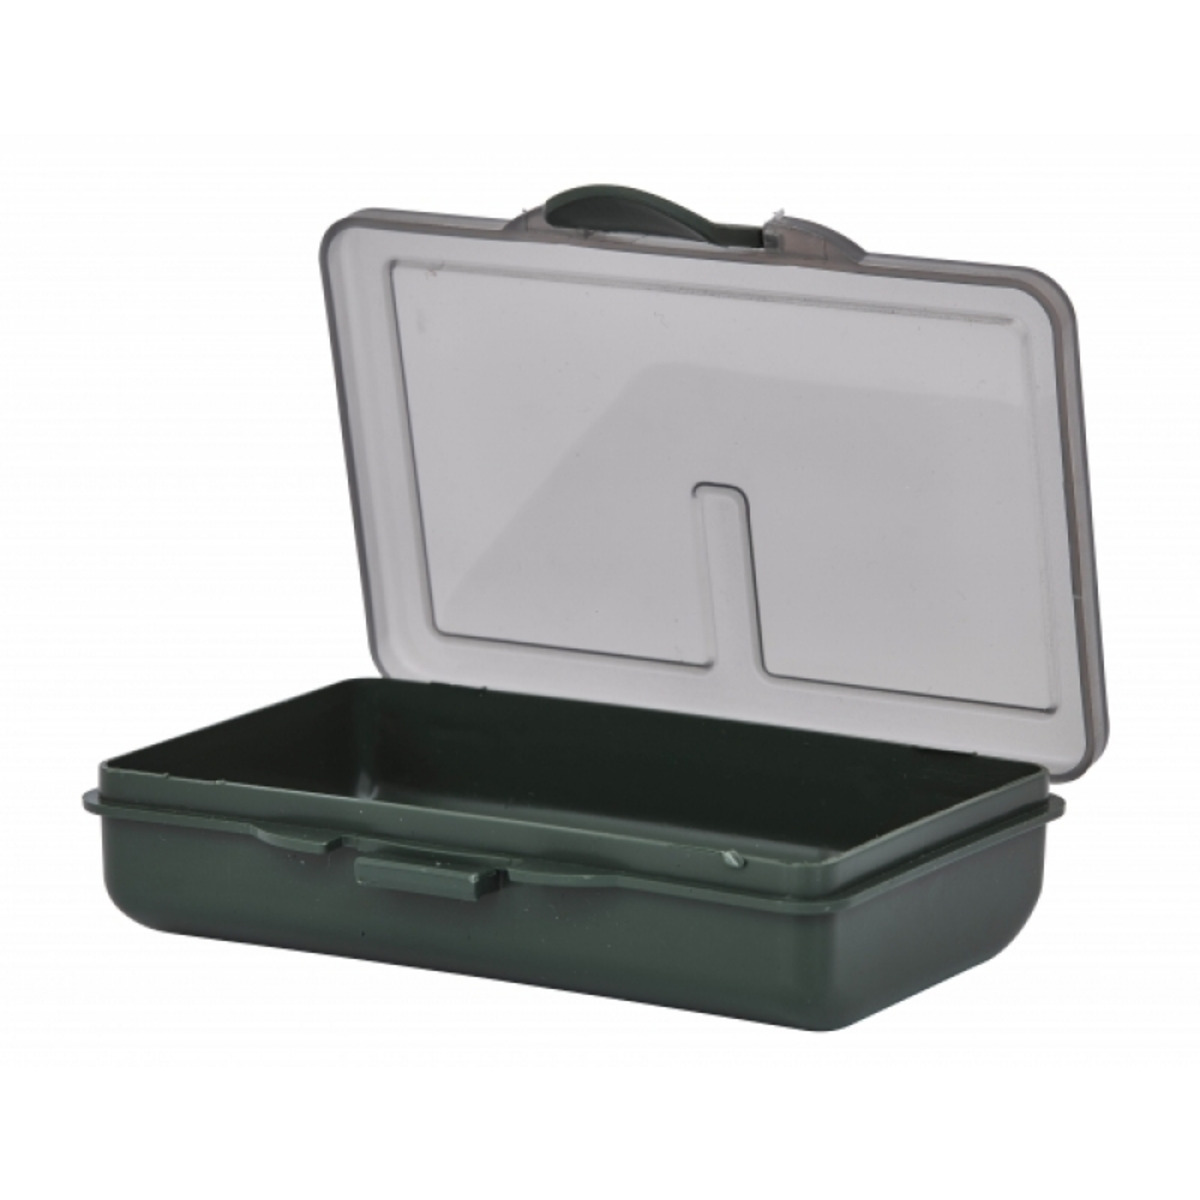 Starbaits Session Small Box - 1 Compartment         